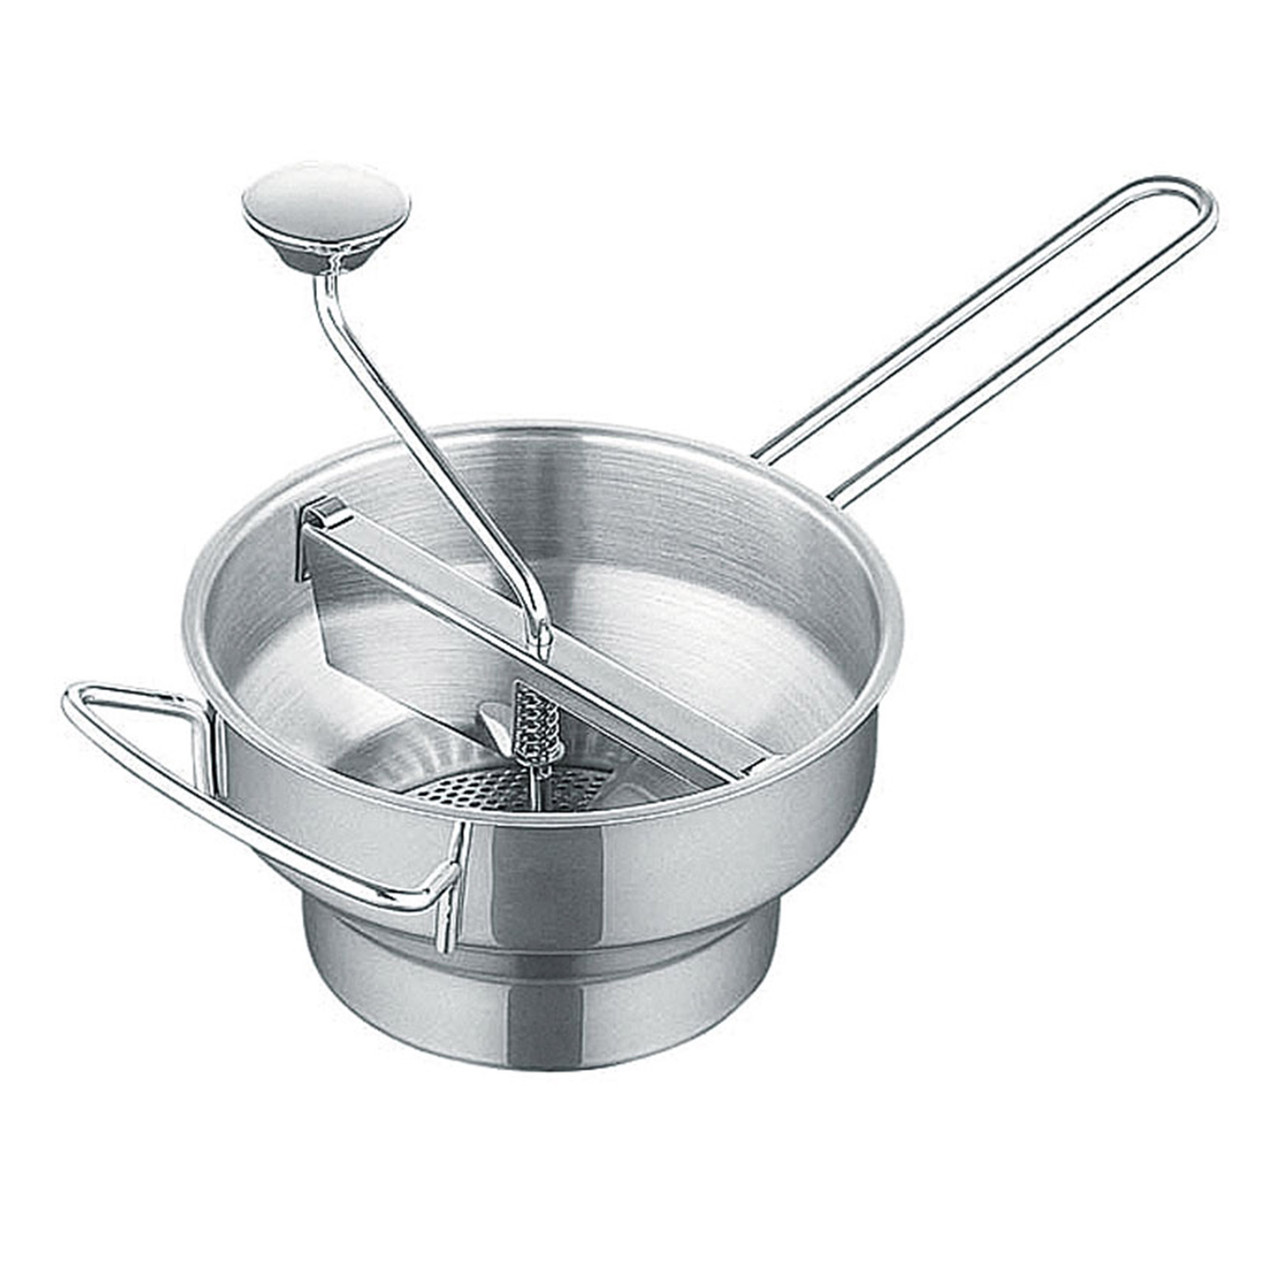 Navaris Stainless Steel Food Mill - Rotary Food Mill Vegetable Strainer Potato Masher Grinder with 3 Milling Discs, 1 Quart Capacity - Dishwasher